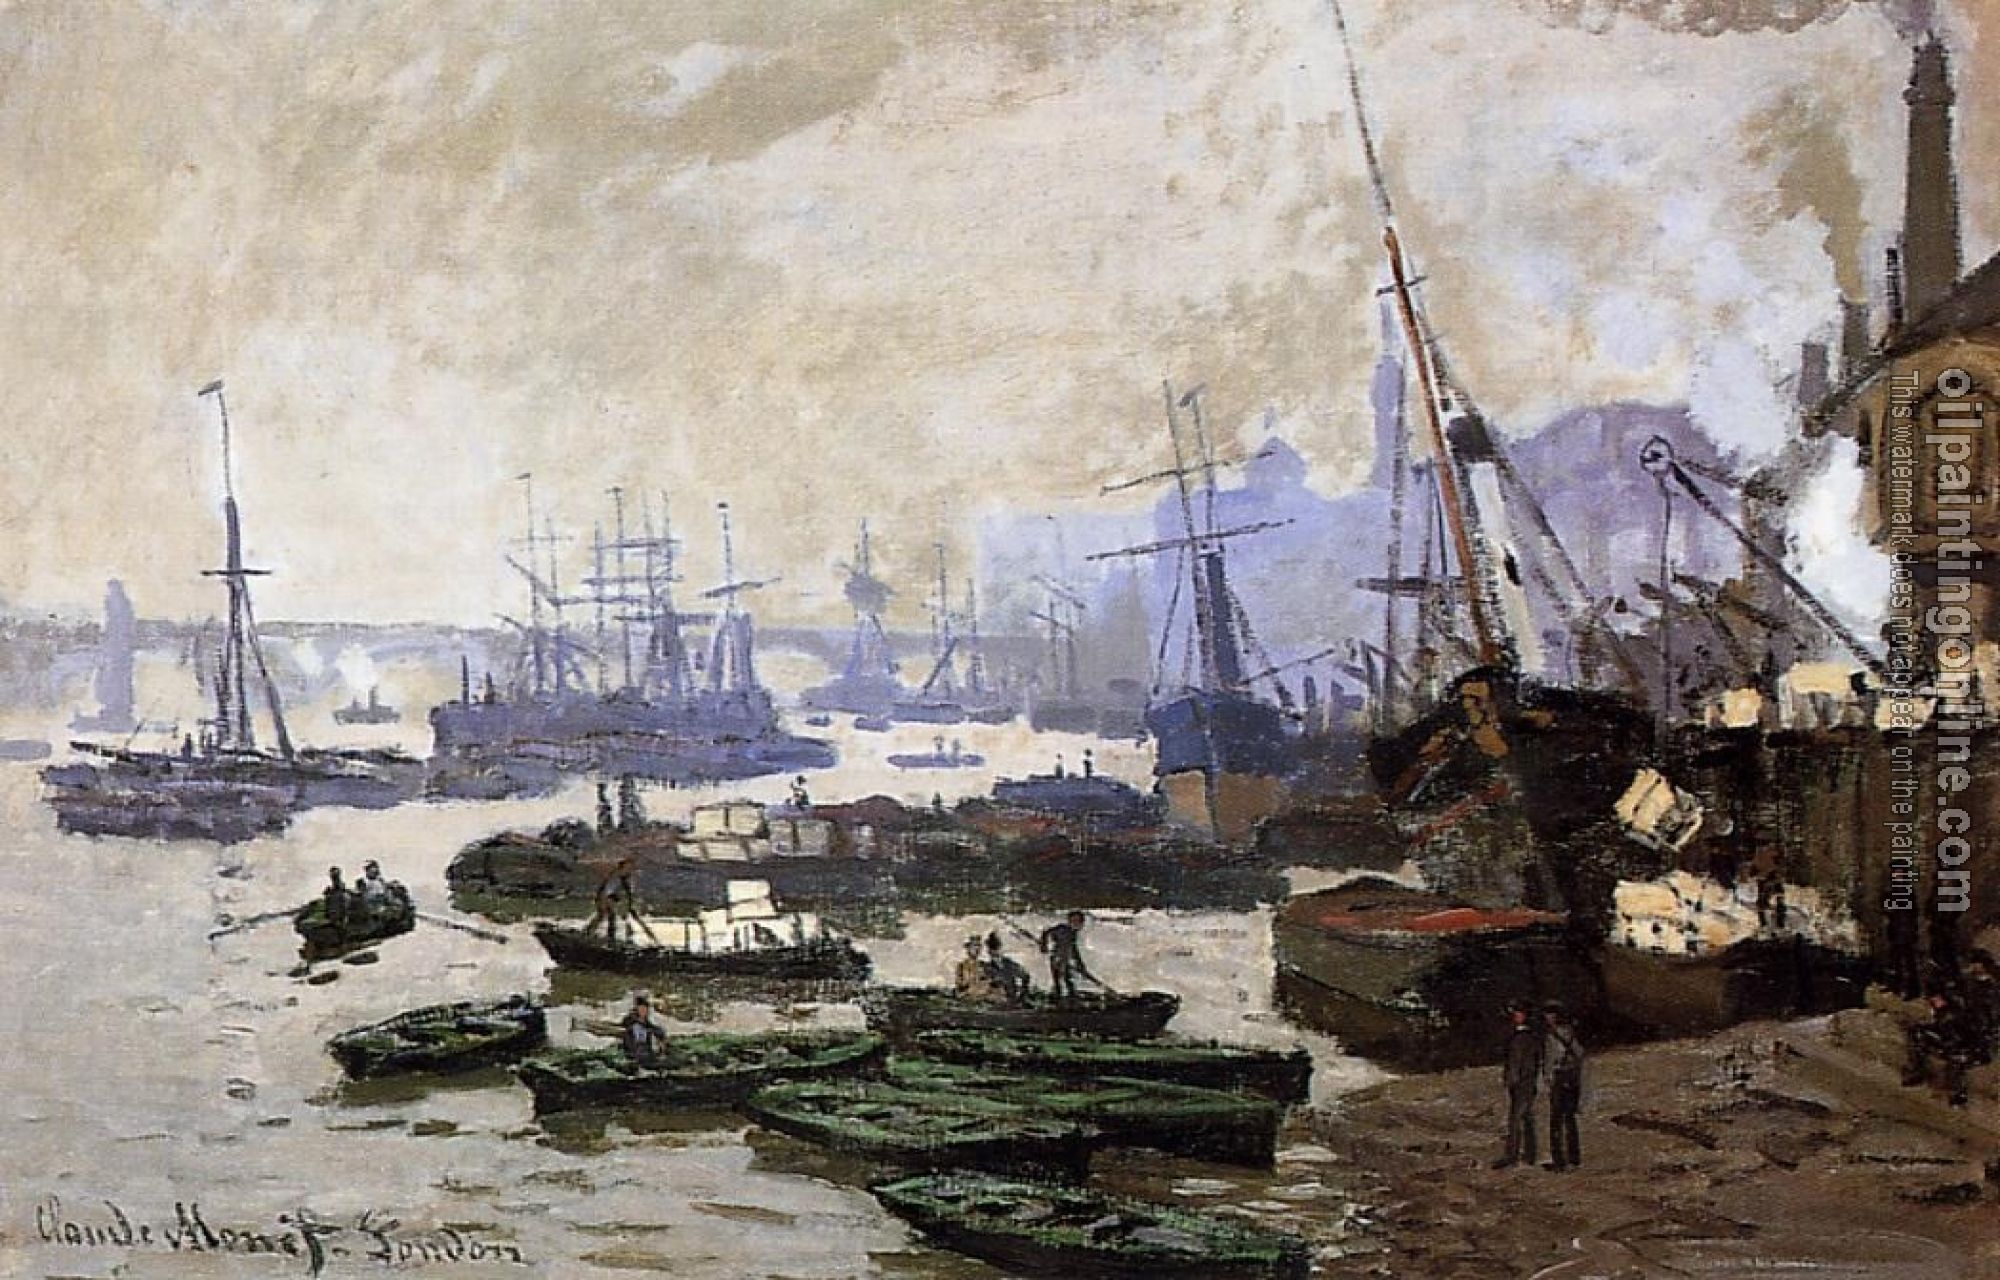 Monet, Claude Oscar - Boats in the Port of London